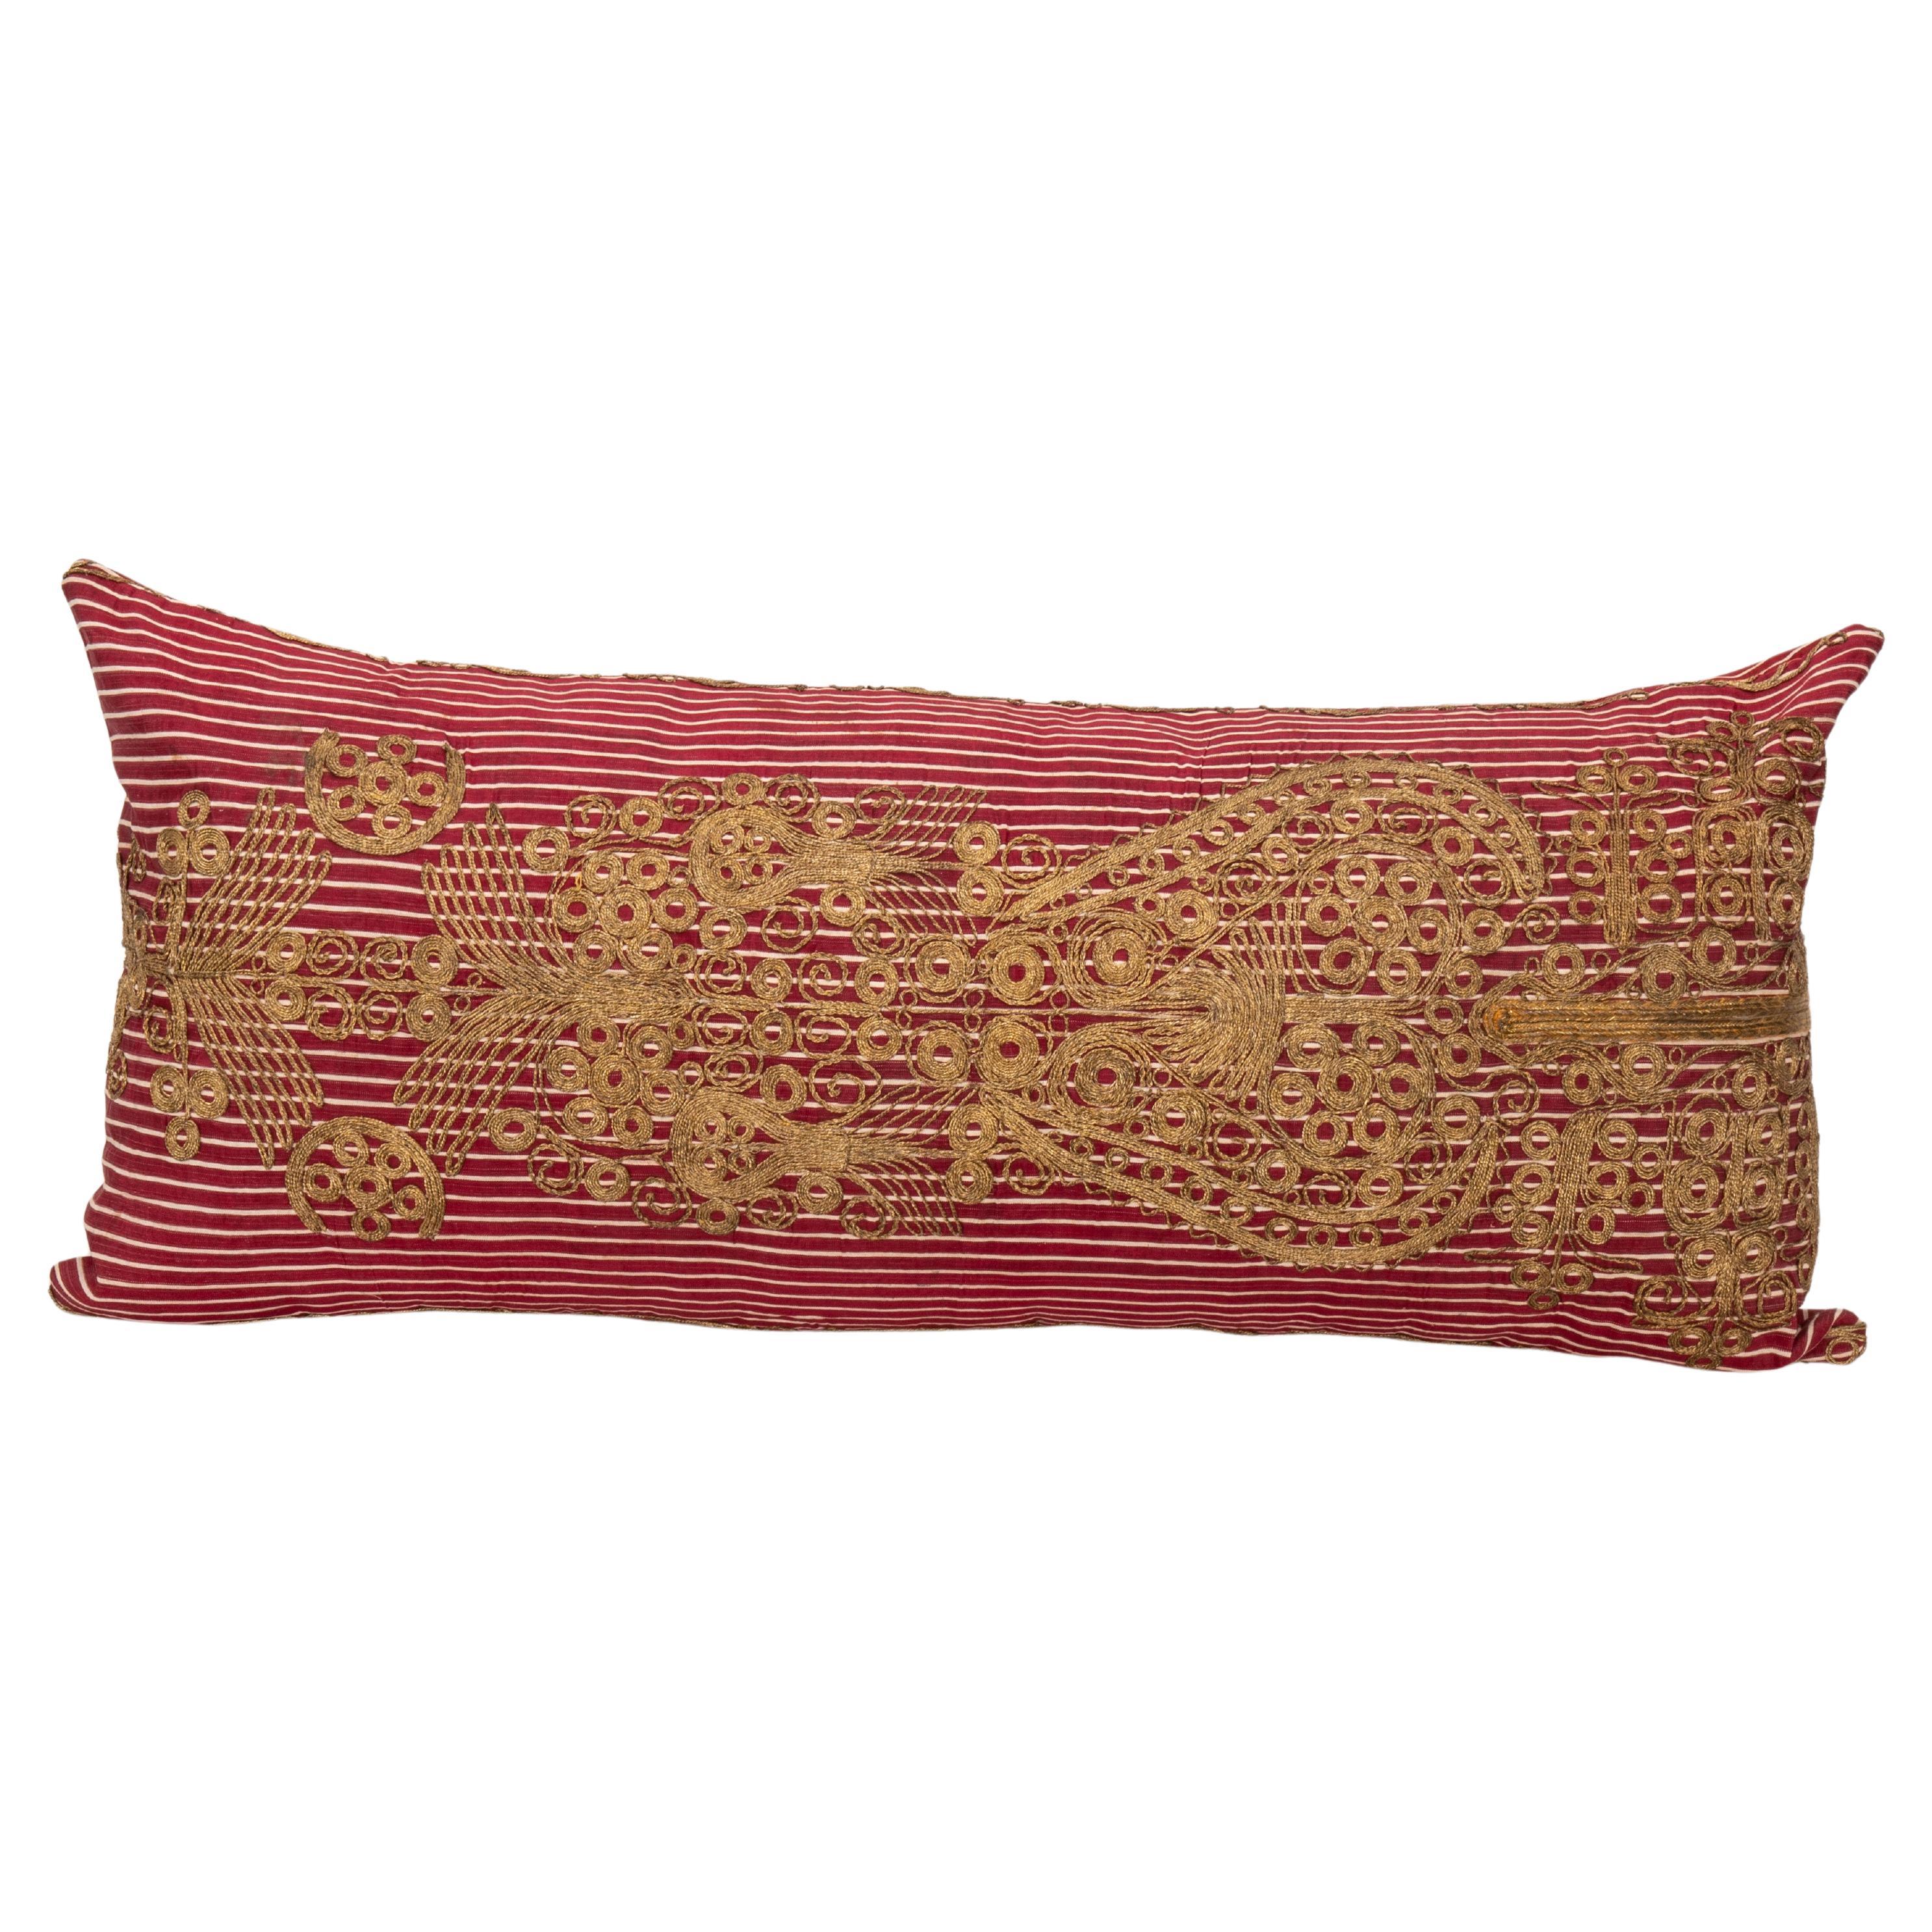 Antique Ottoman Turkish Pillow Case, Early 20th C. For Sale